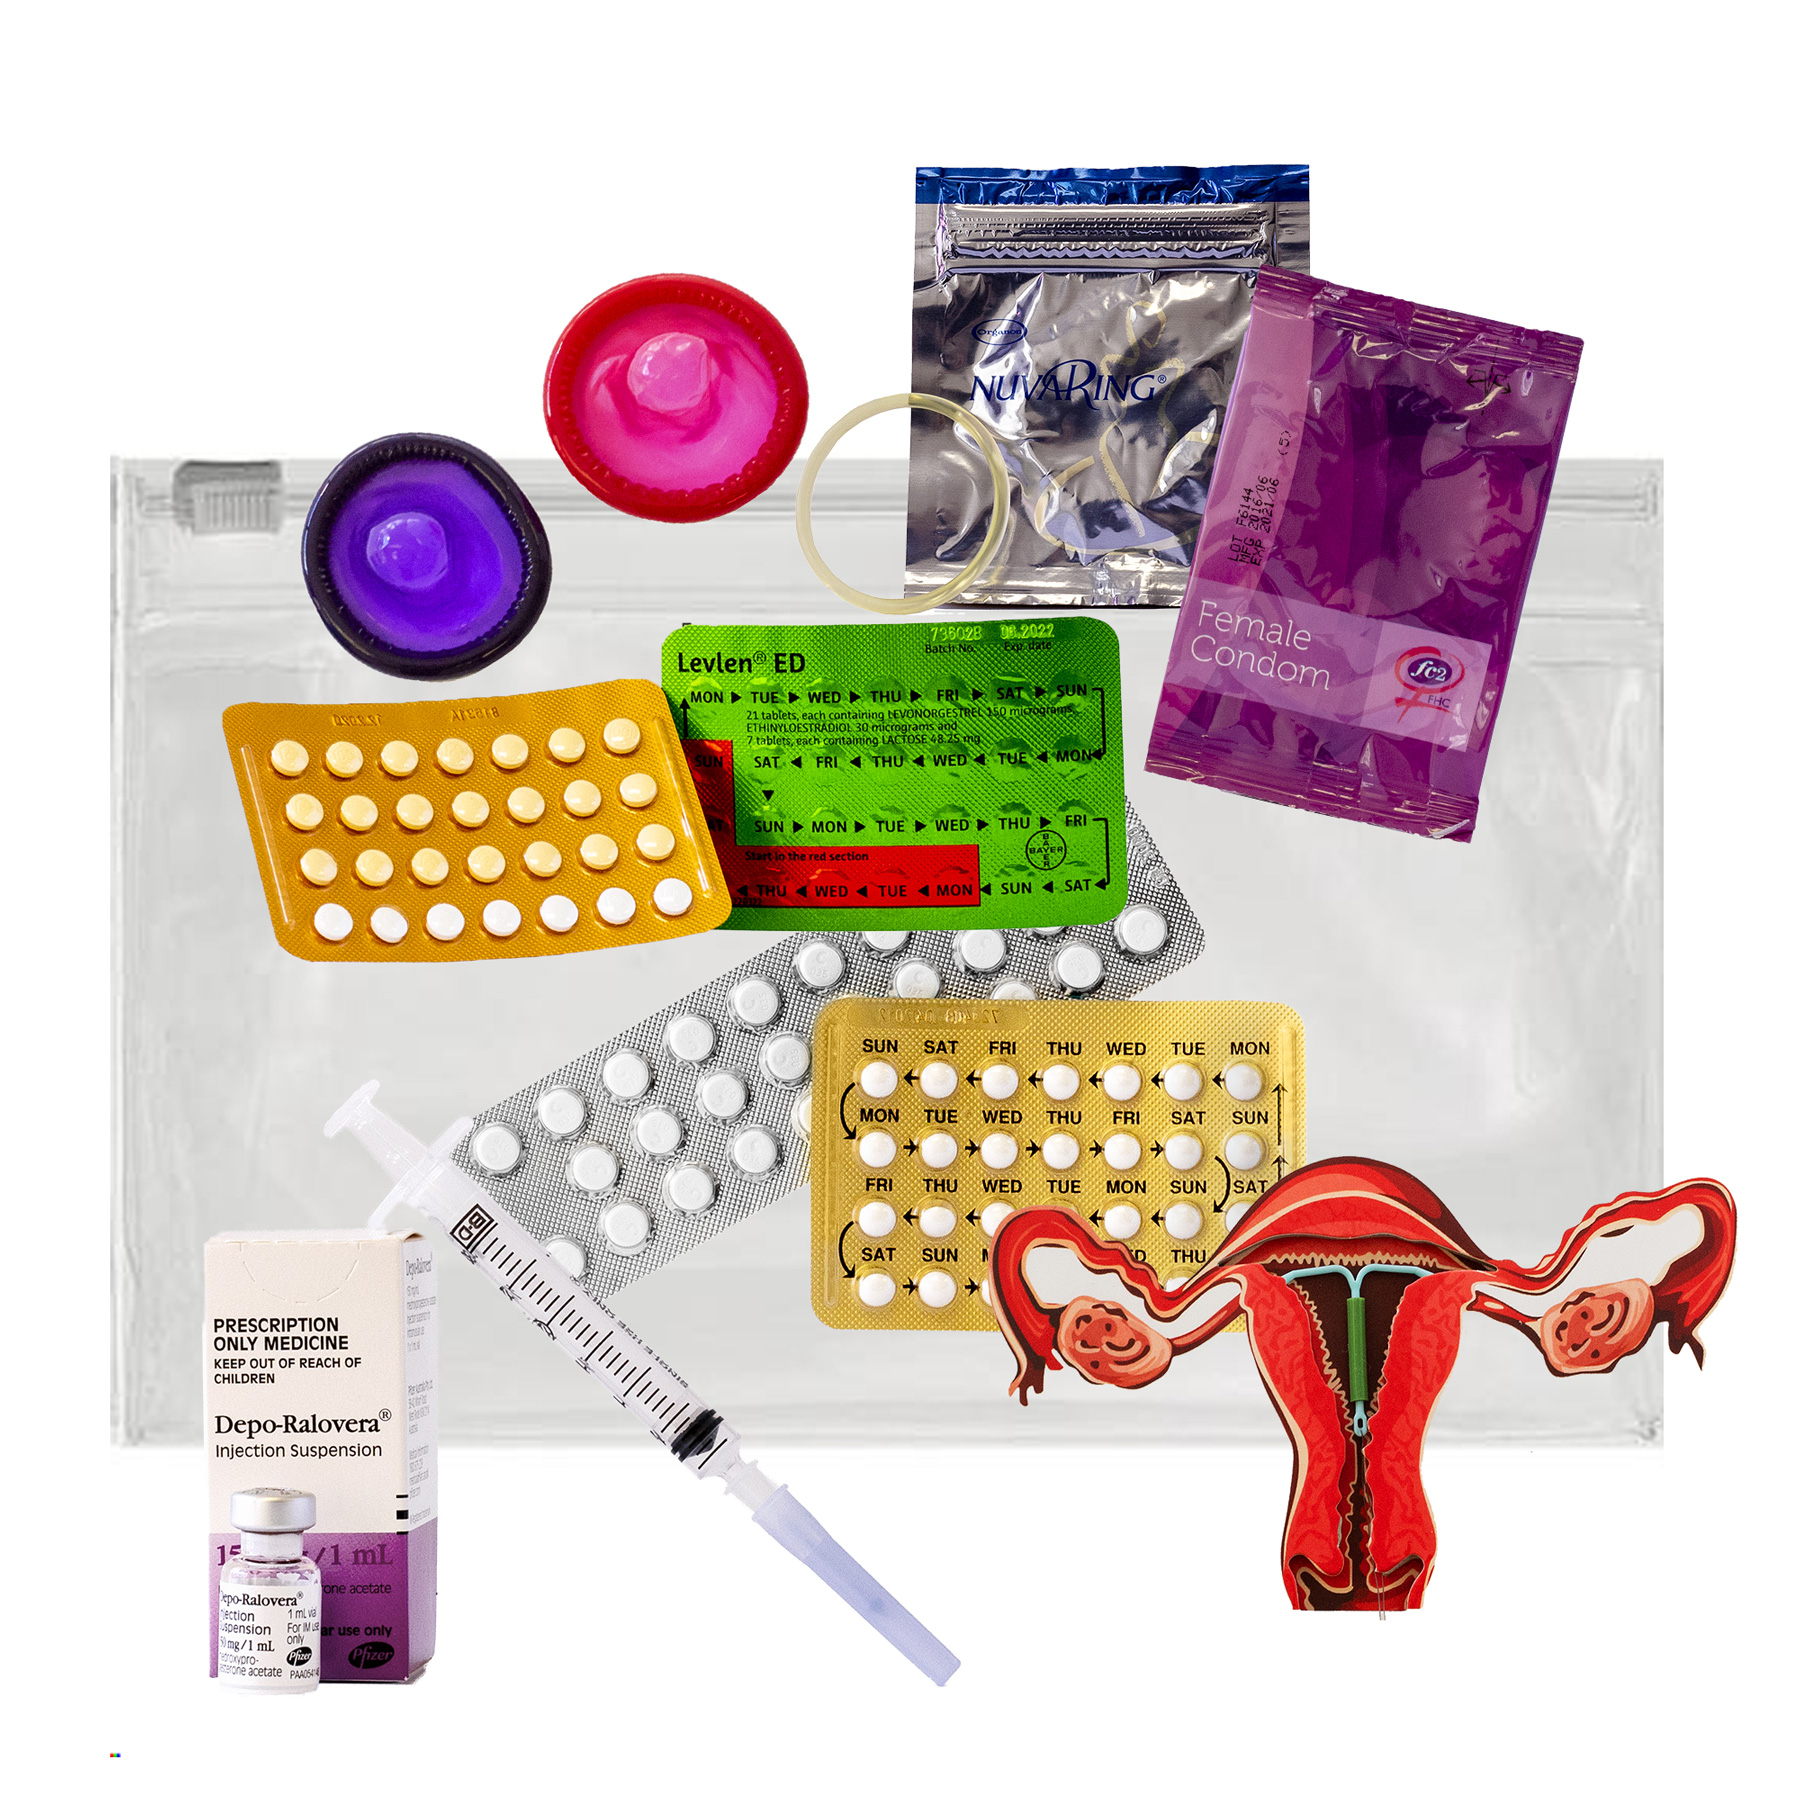 Contraceptive Practices in France